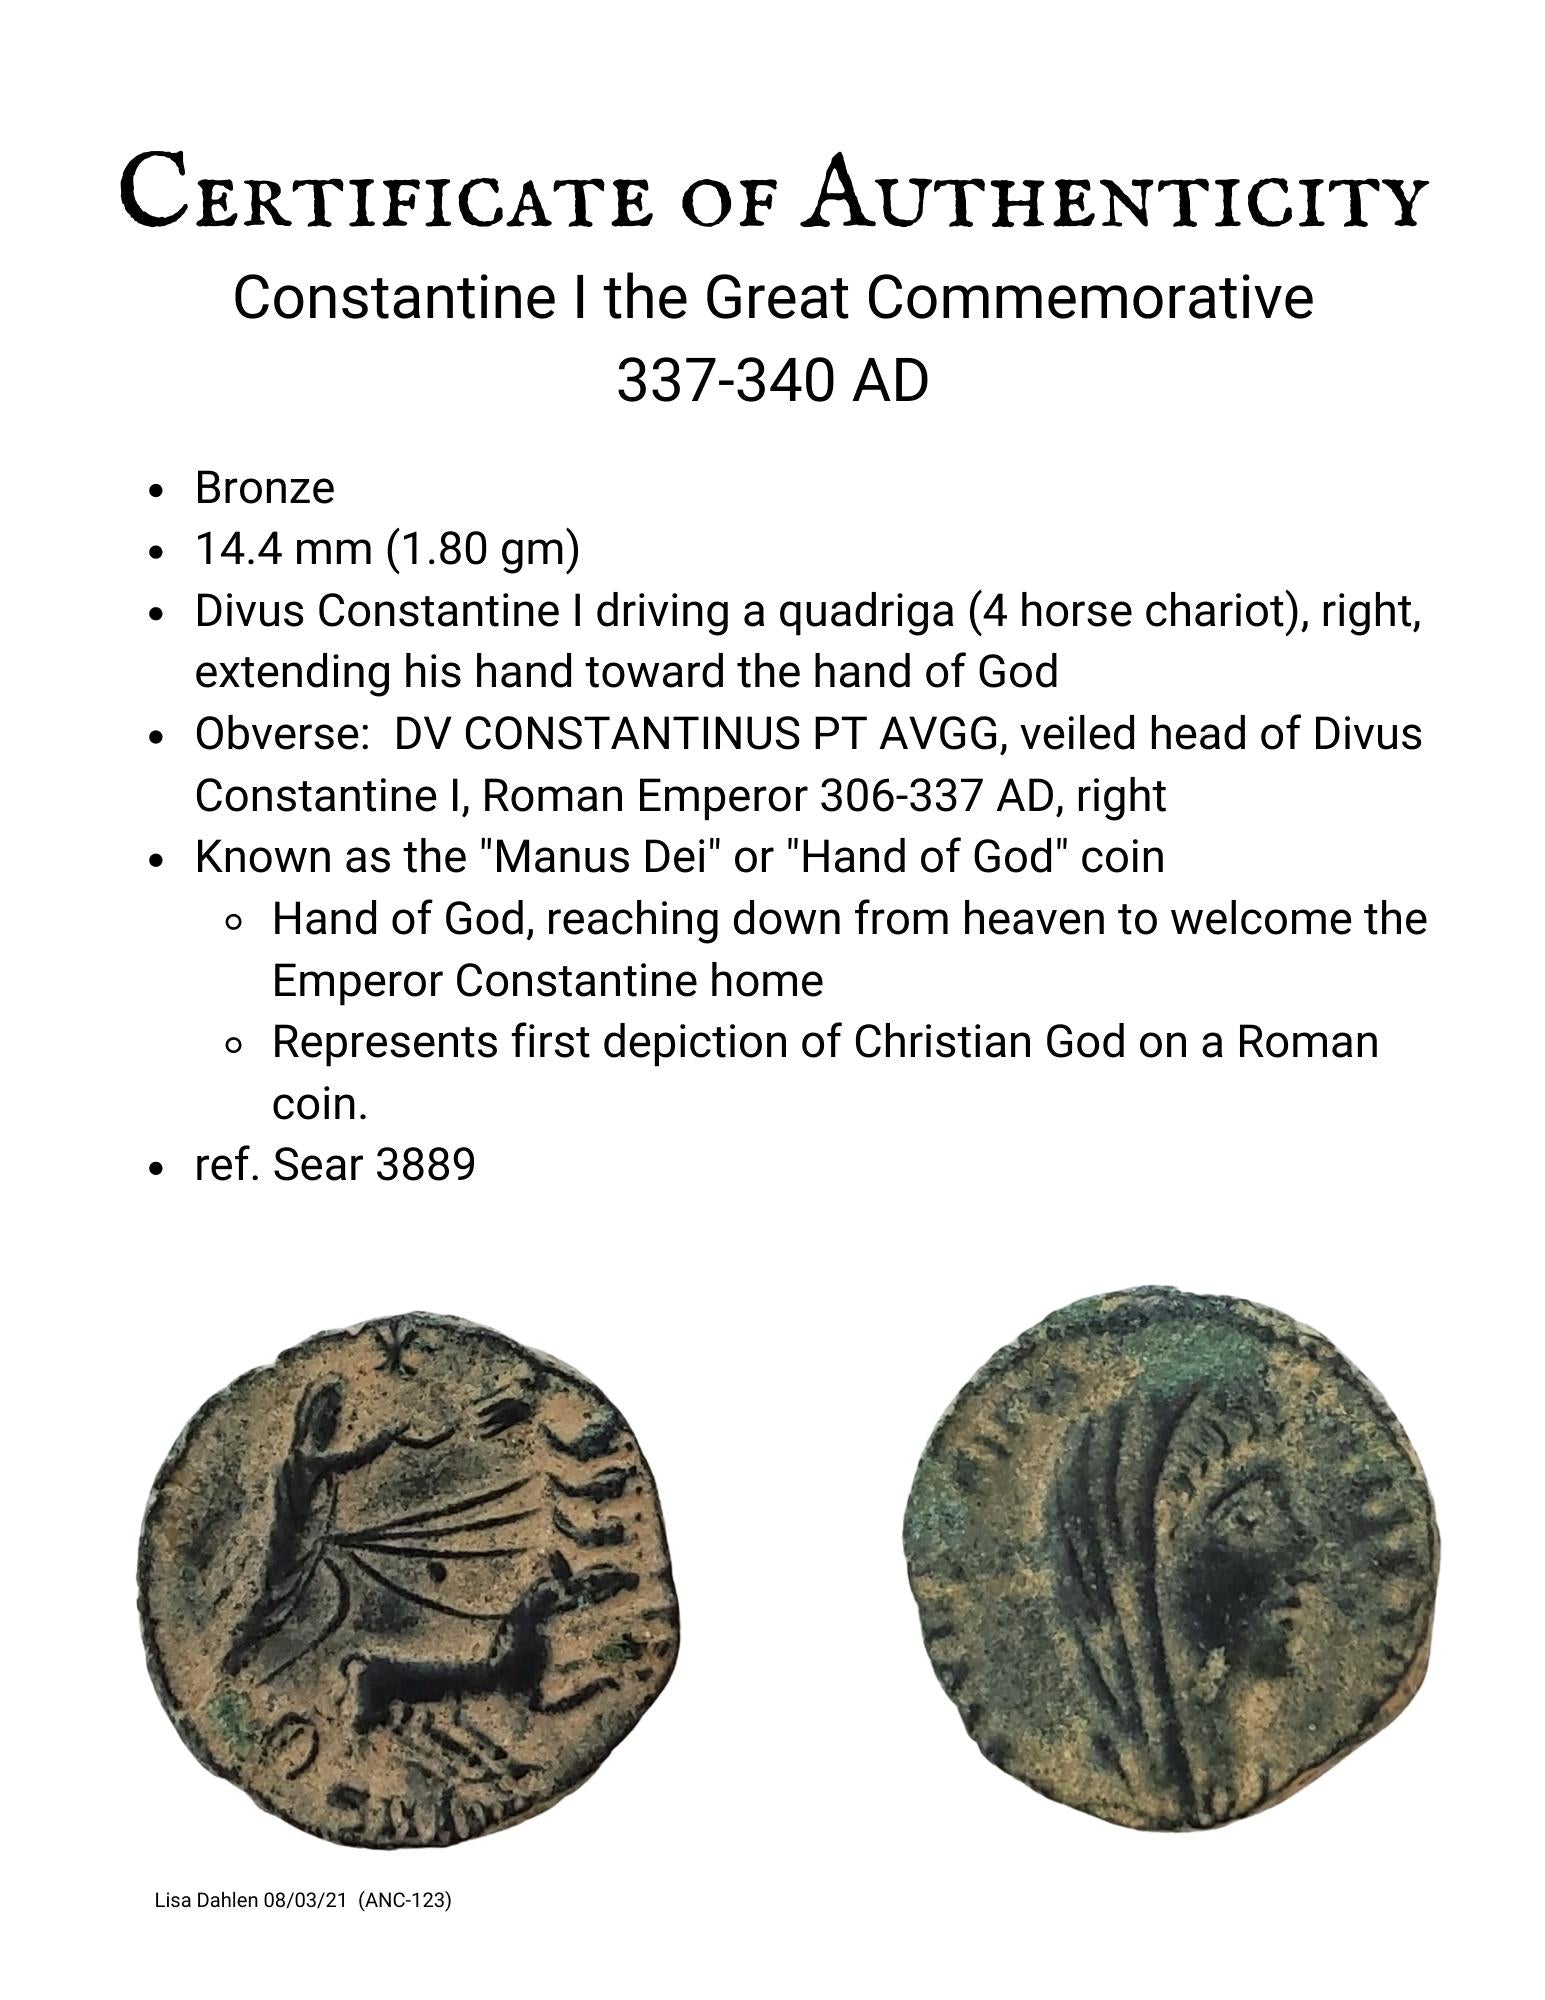 Constantine Commemorative Coin Hand of God Four Horse Chariot Certificate